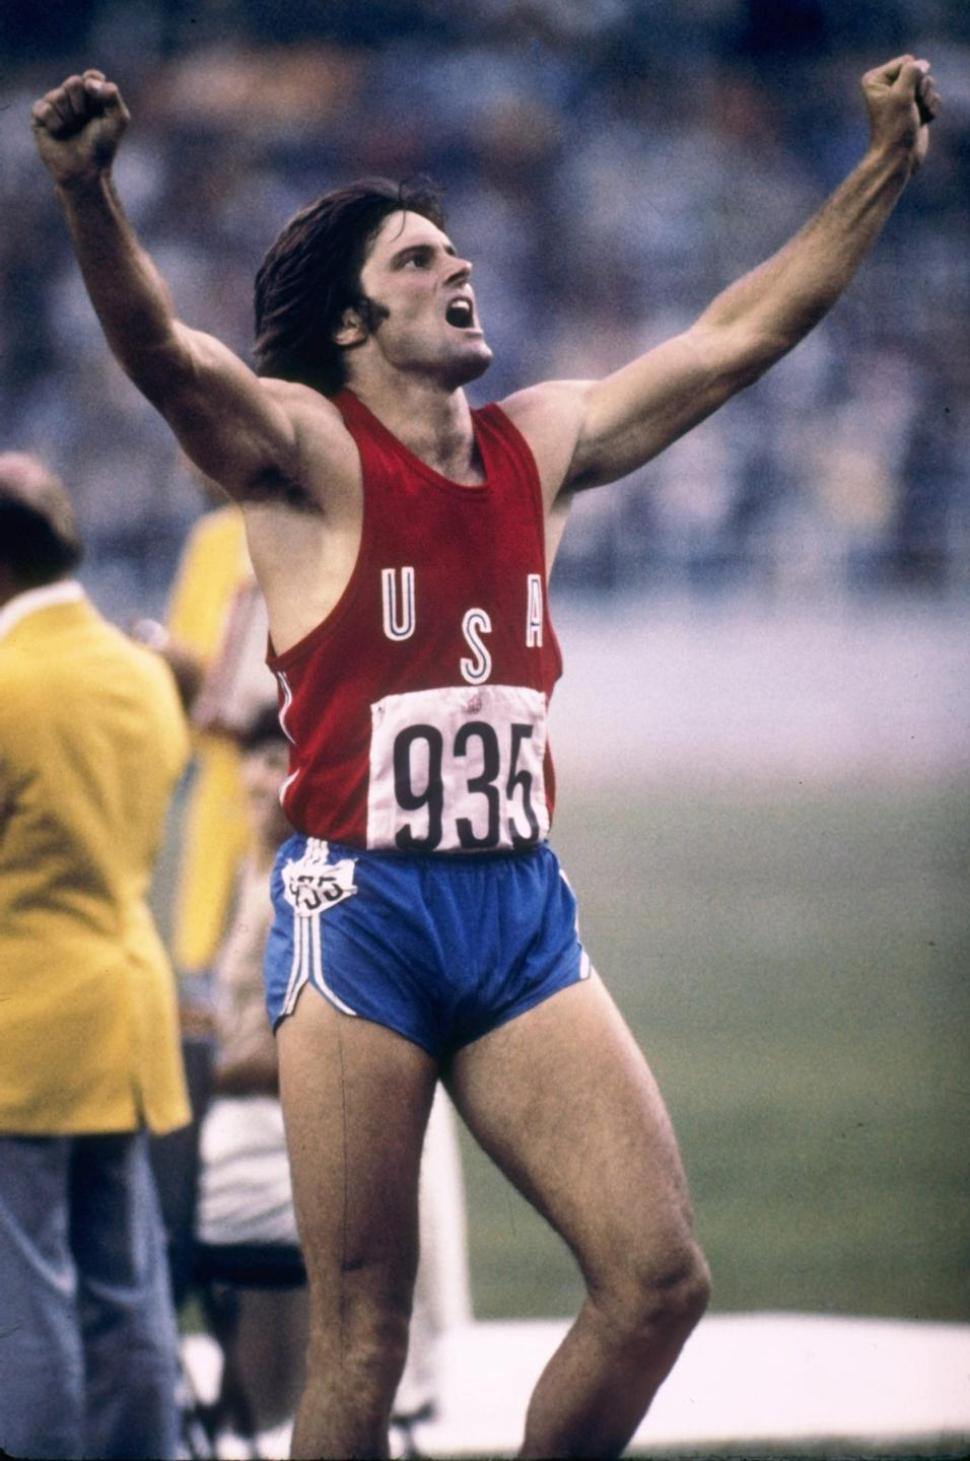 Bruce Jenner of the USA celebrating during his record setting performance in the decathlon in the 1976 Summer Olympics in Montreal, Canada.